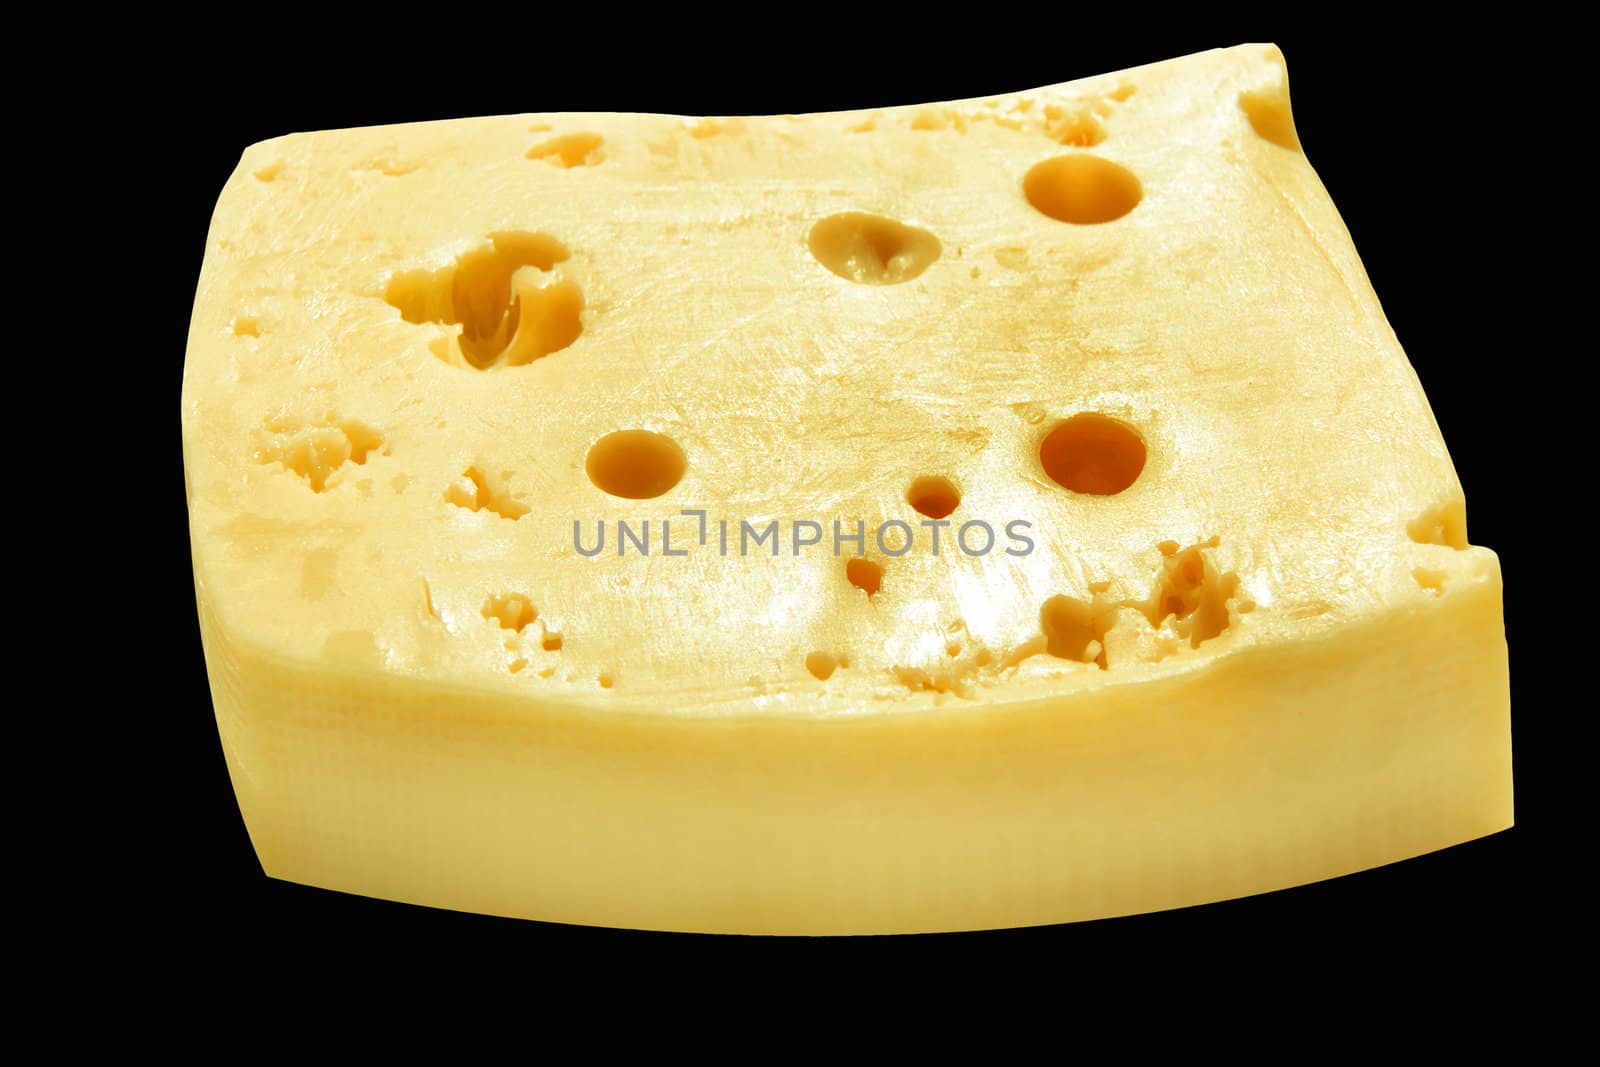 Piece of the cheese on black background by cobol1964